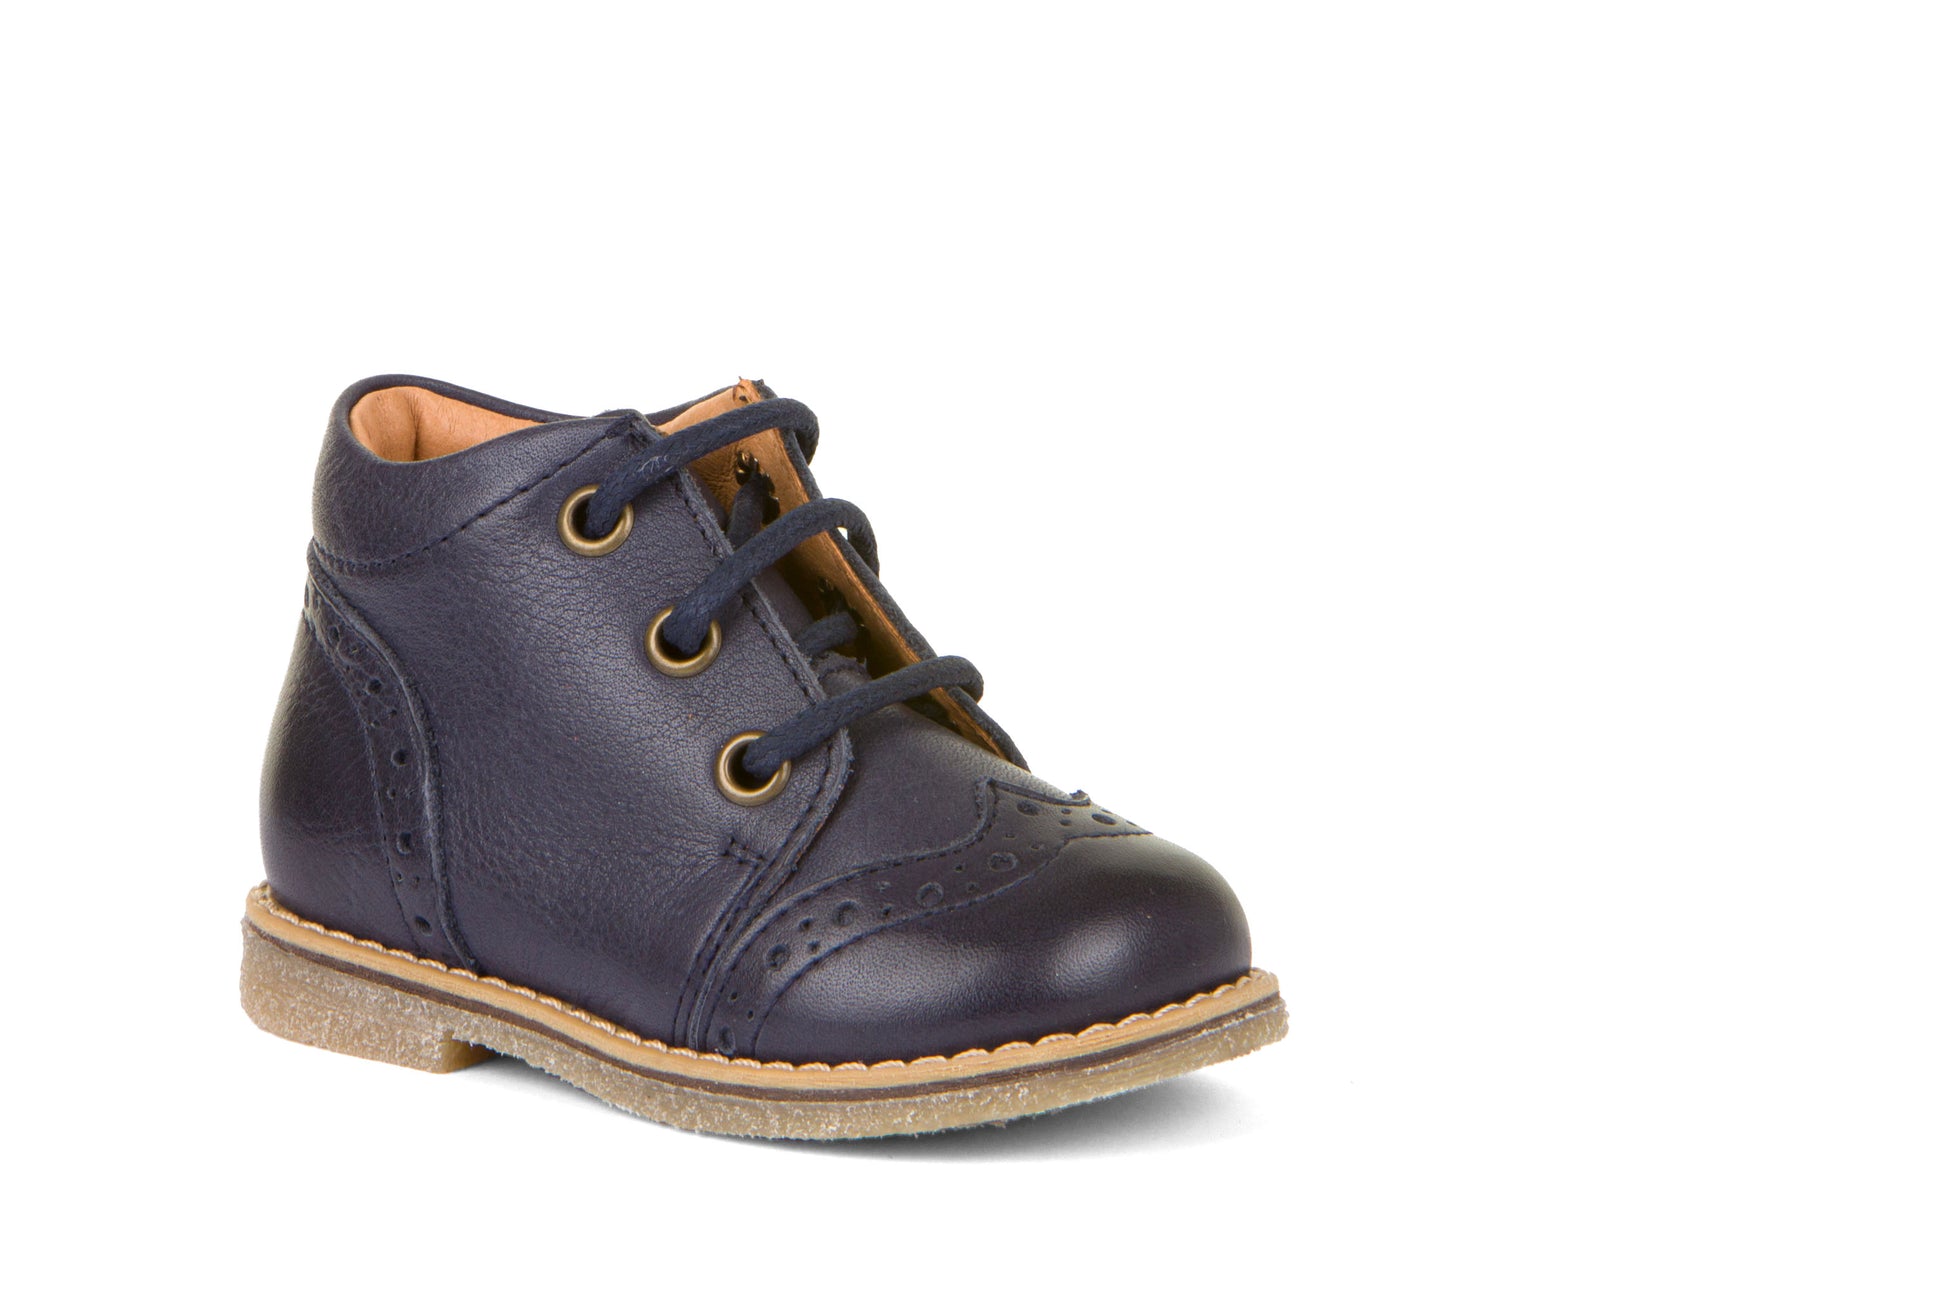 A boys boot by Froddo, style Coper G2130276-2 in Navy with lace-up fastening. Right front side view.